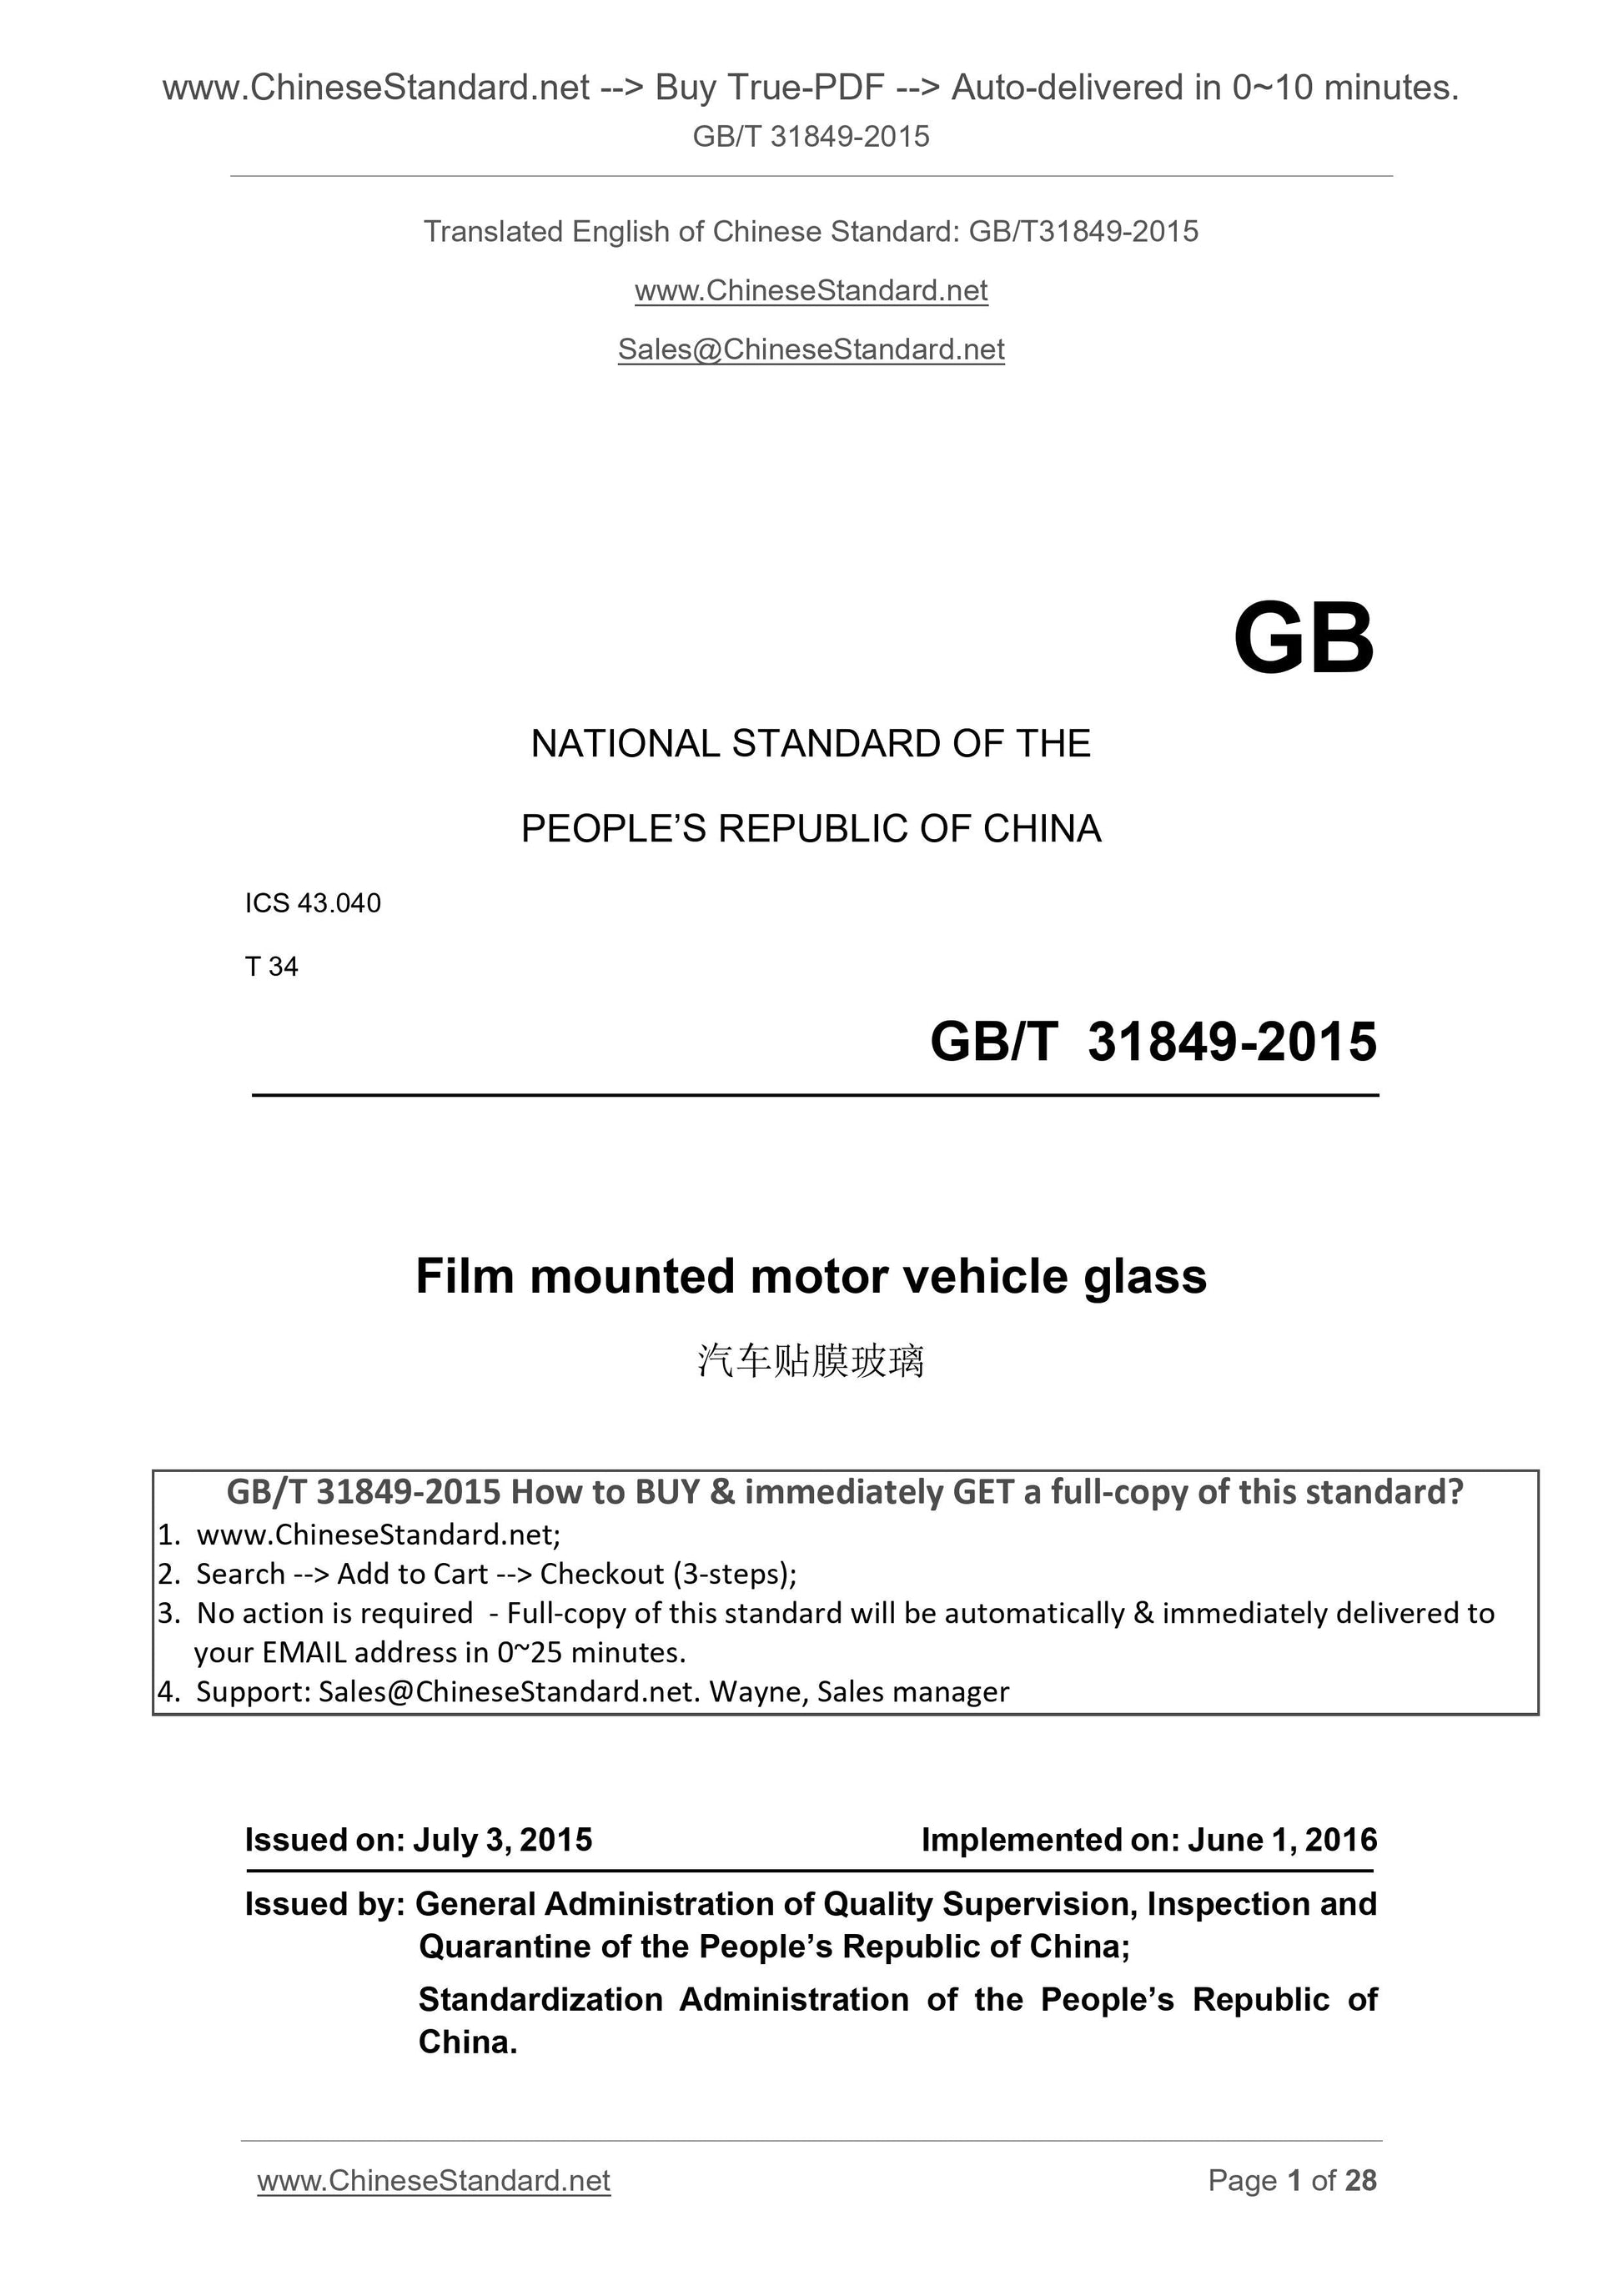 GB/T 31849-2015 Page 1